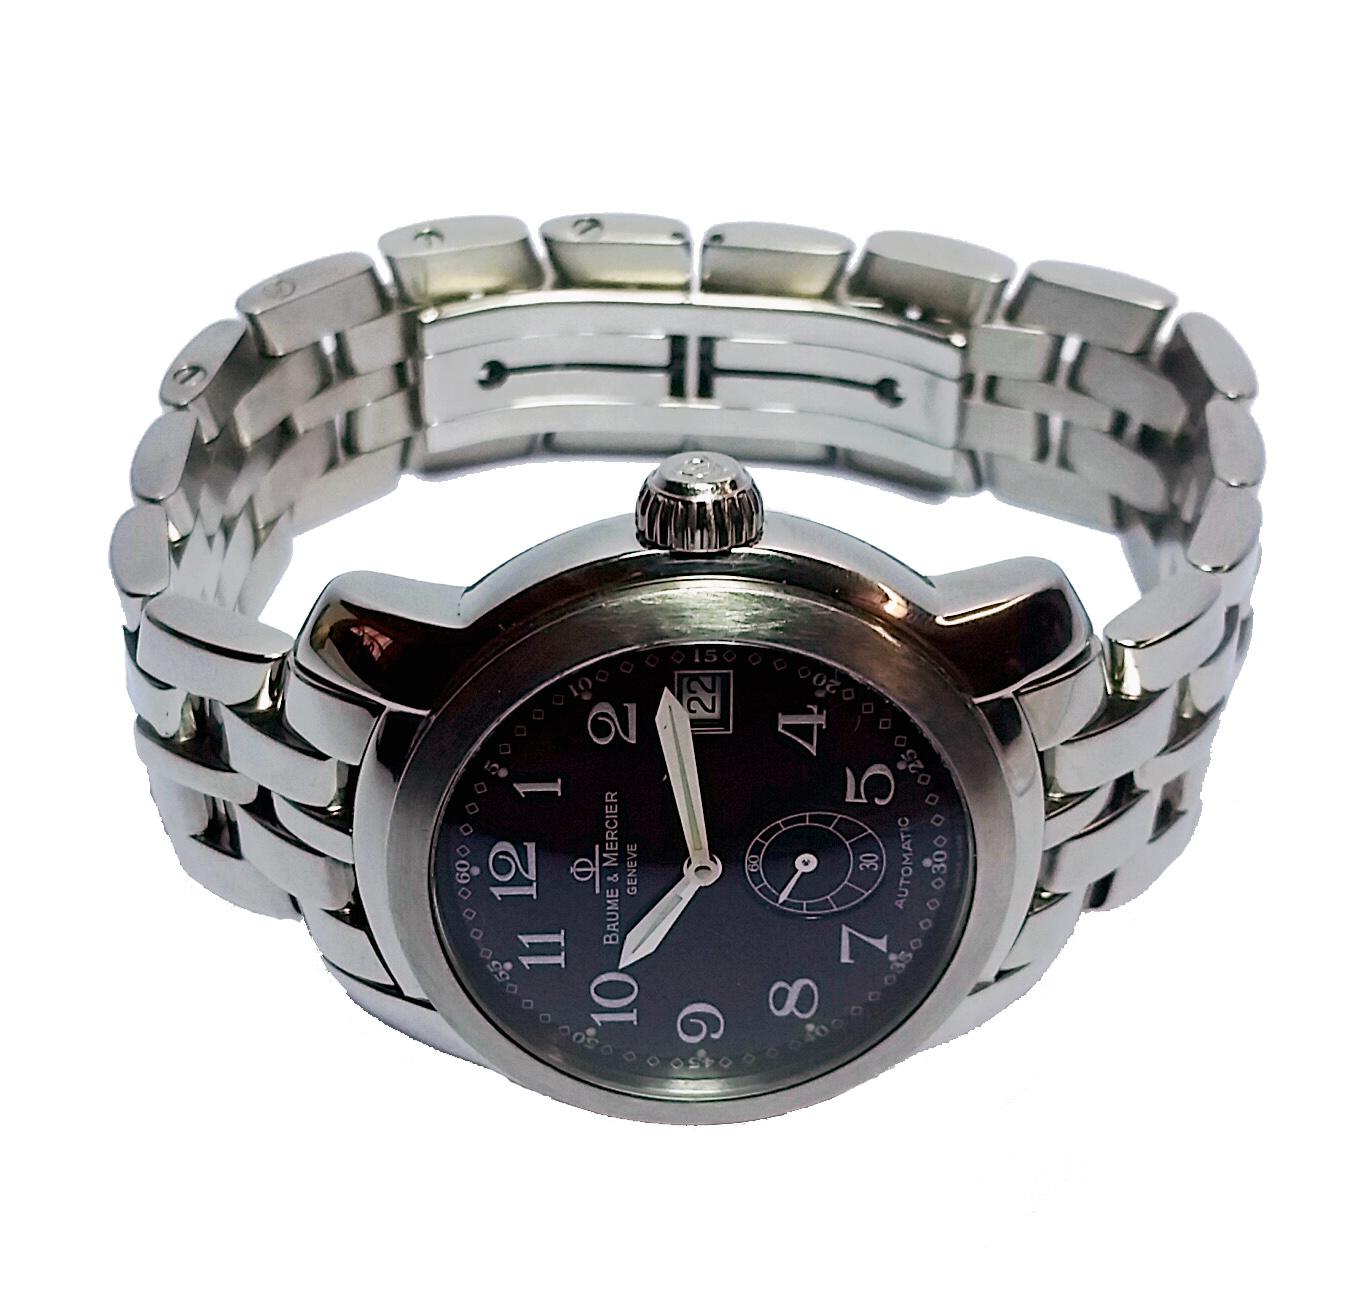 Stainless Steel Automatic Men's Wrist Watch
Capeland Series
39mm Case
Polished Case & Bracelet
Satin-Finish on Bezel
Black Dial with Arabic Markers & Date
Luminescent Hands
$2,495 MSRP
Includes one year warranty